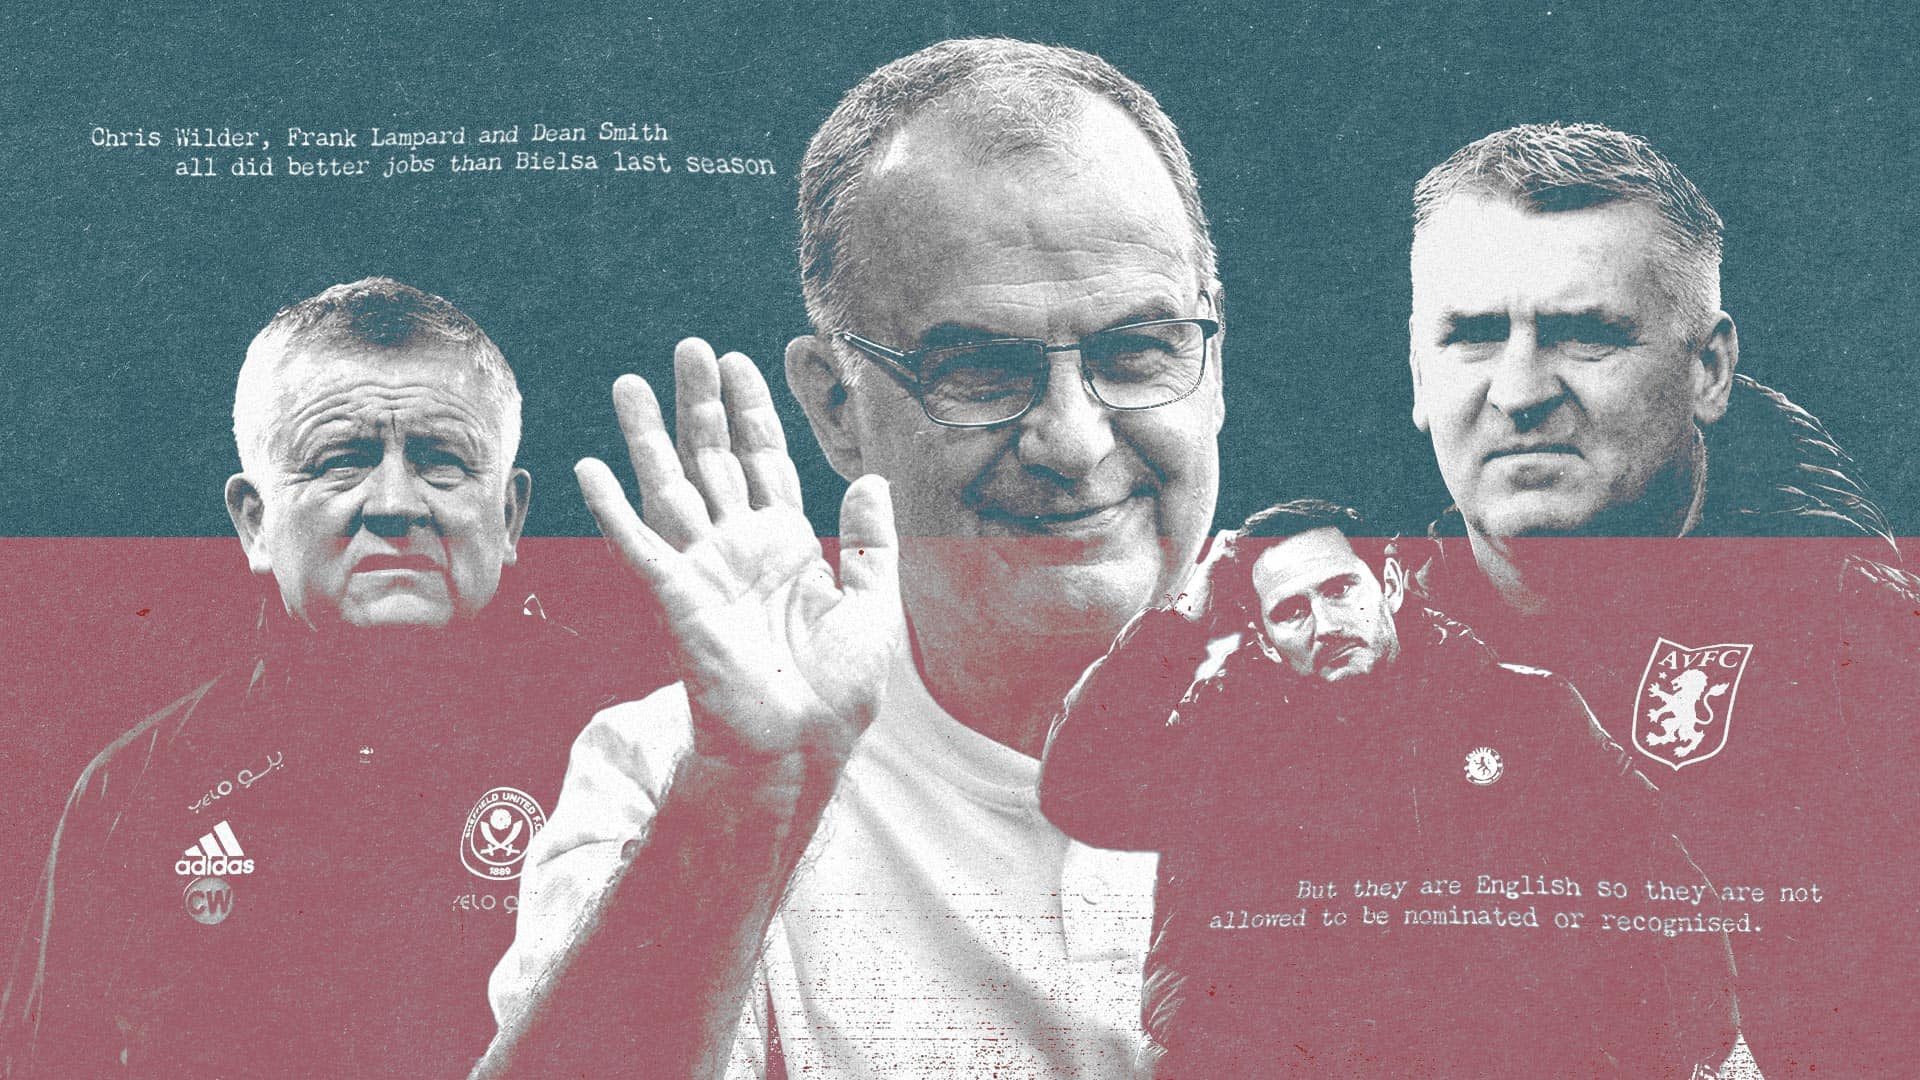 Marcelo Bielsa waving cheerfully while Chris Wilder, Frank Lampard and Dean Smith look upset